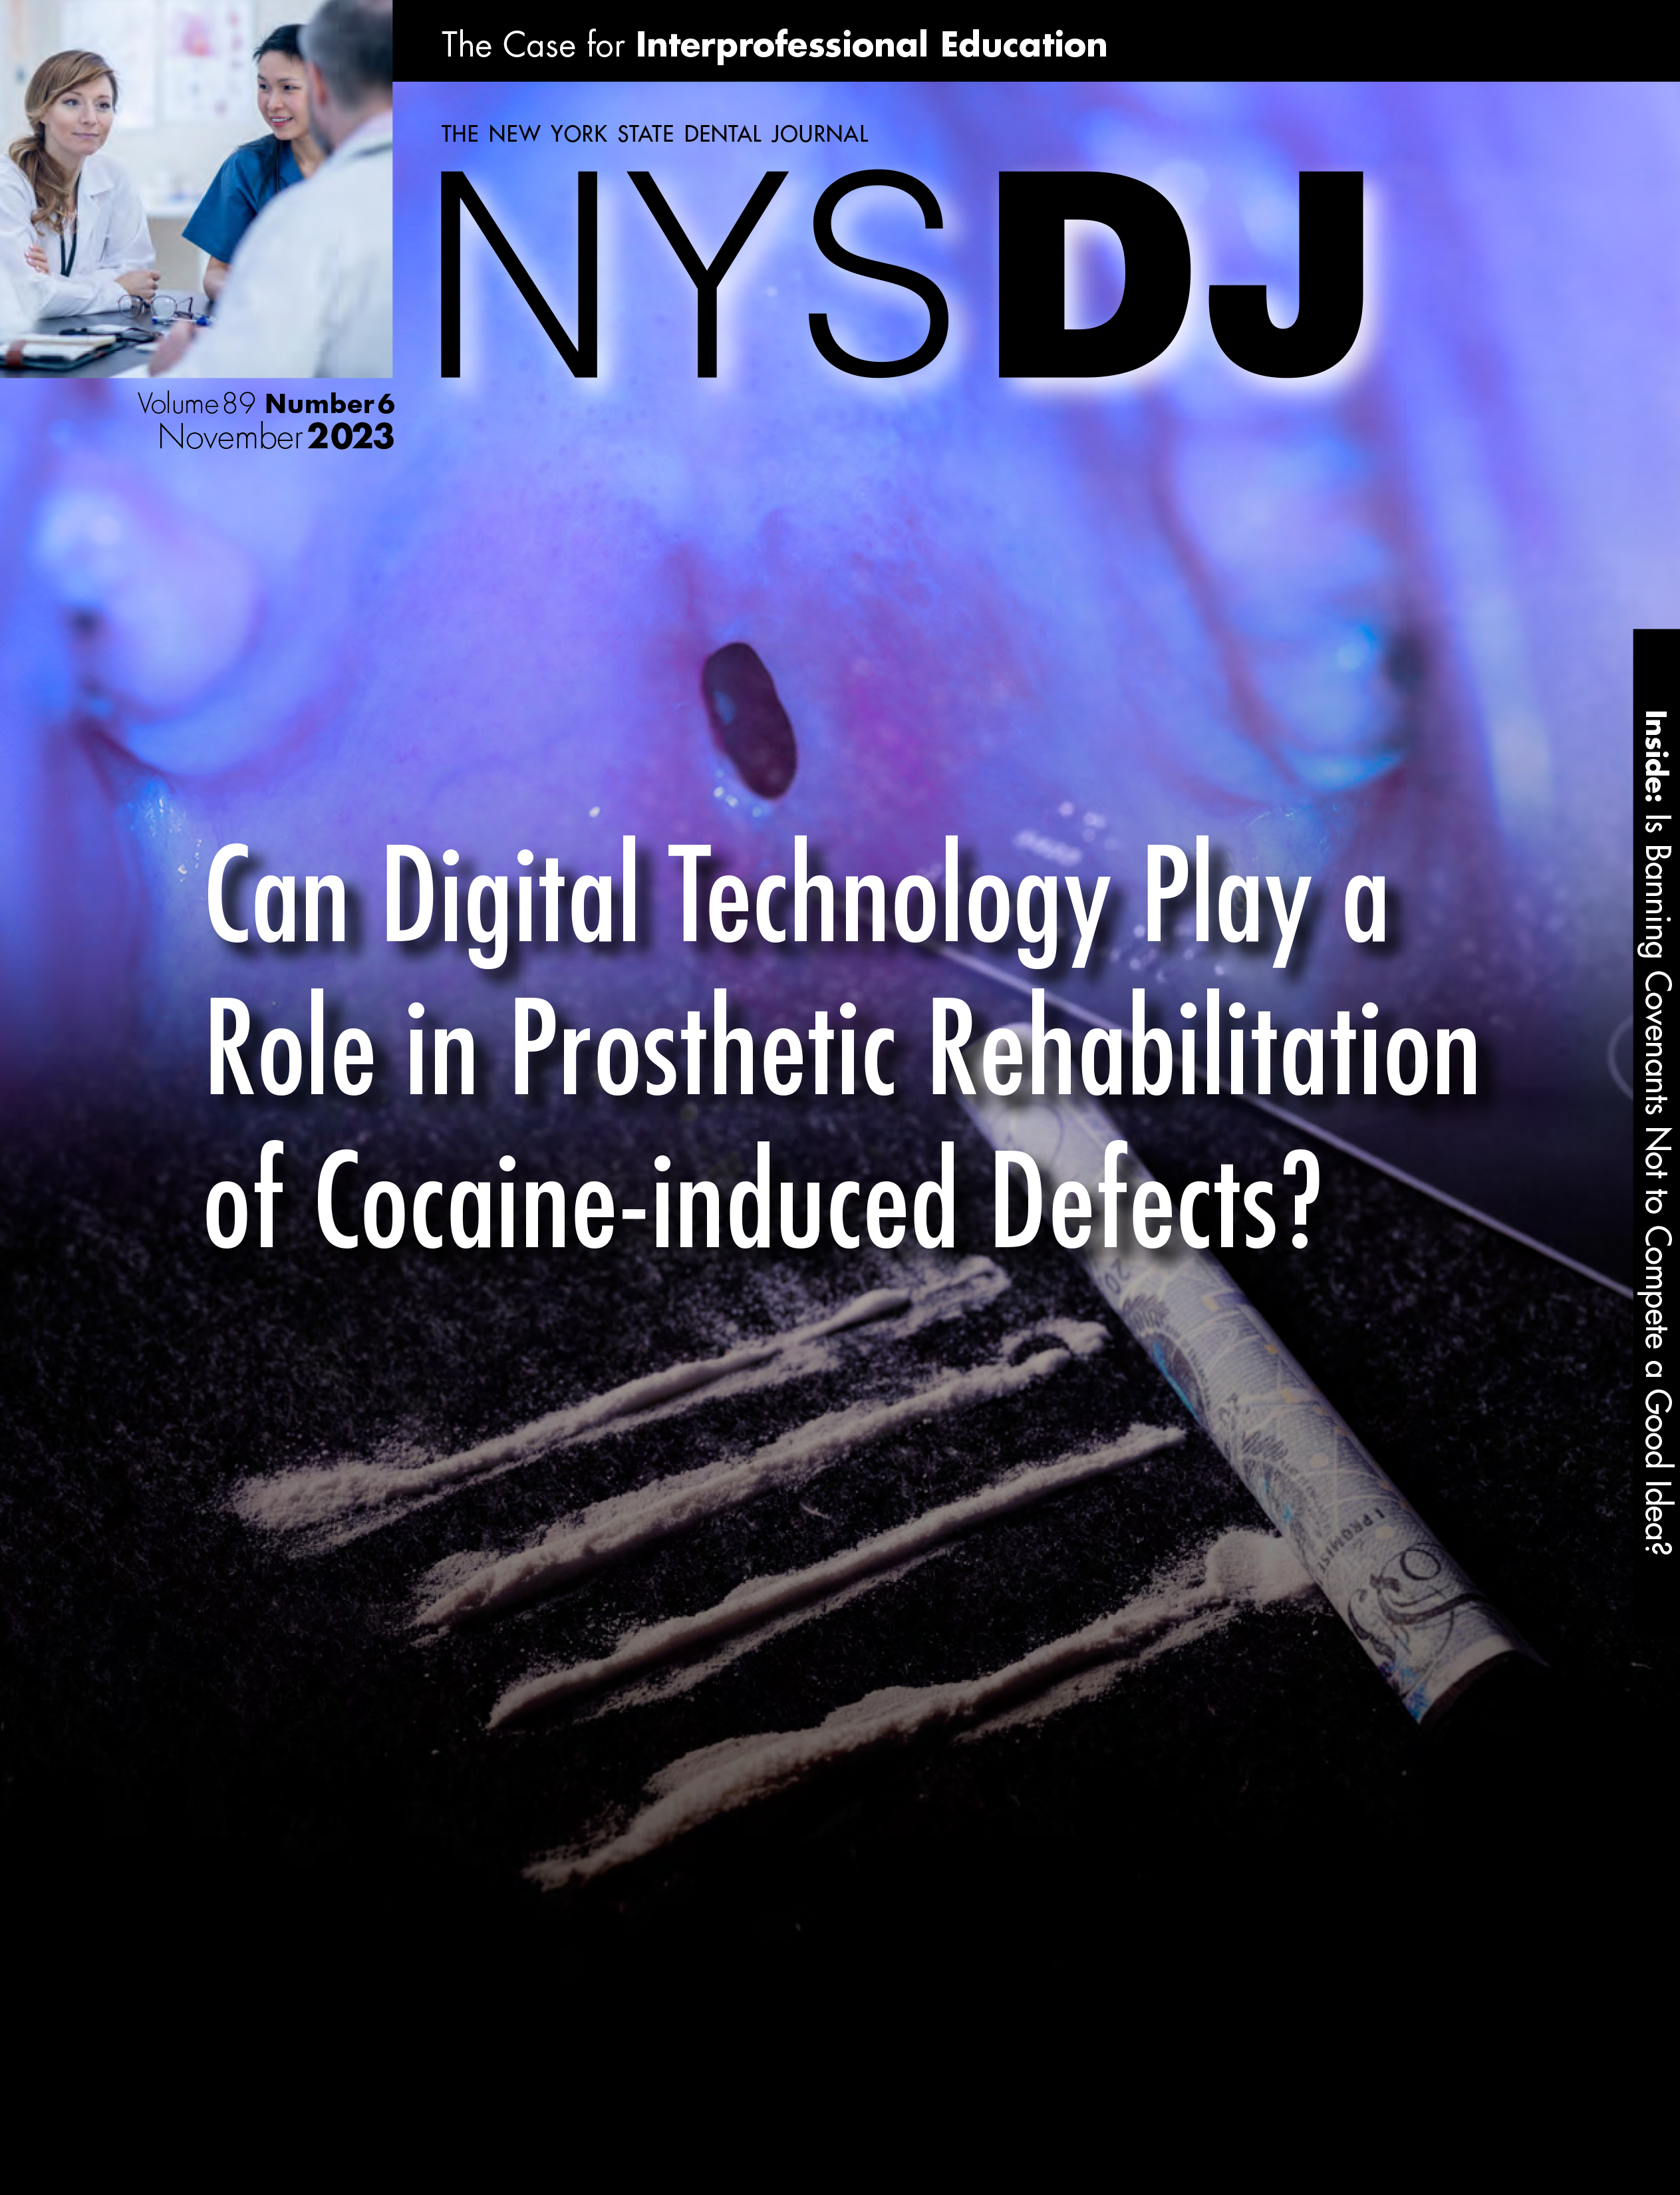 Cover of the NYSDJ with an image of a mouth interior showing a posteriorly located oronasal fistula, with white lines implied to be cocaine and a rolled dollar bill overlaid.